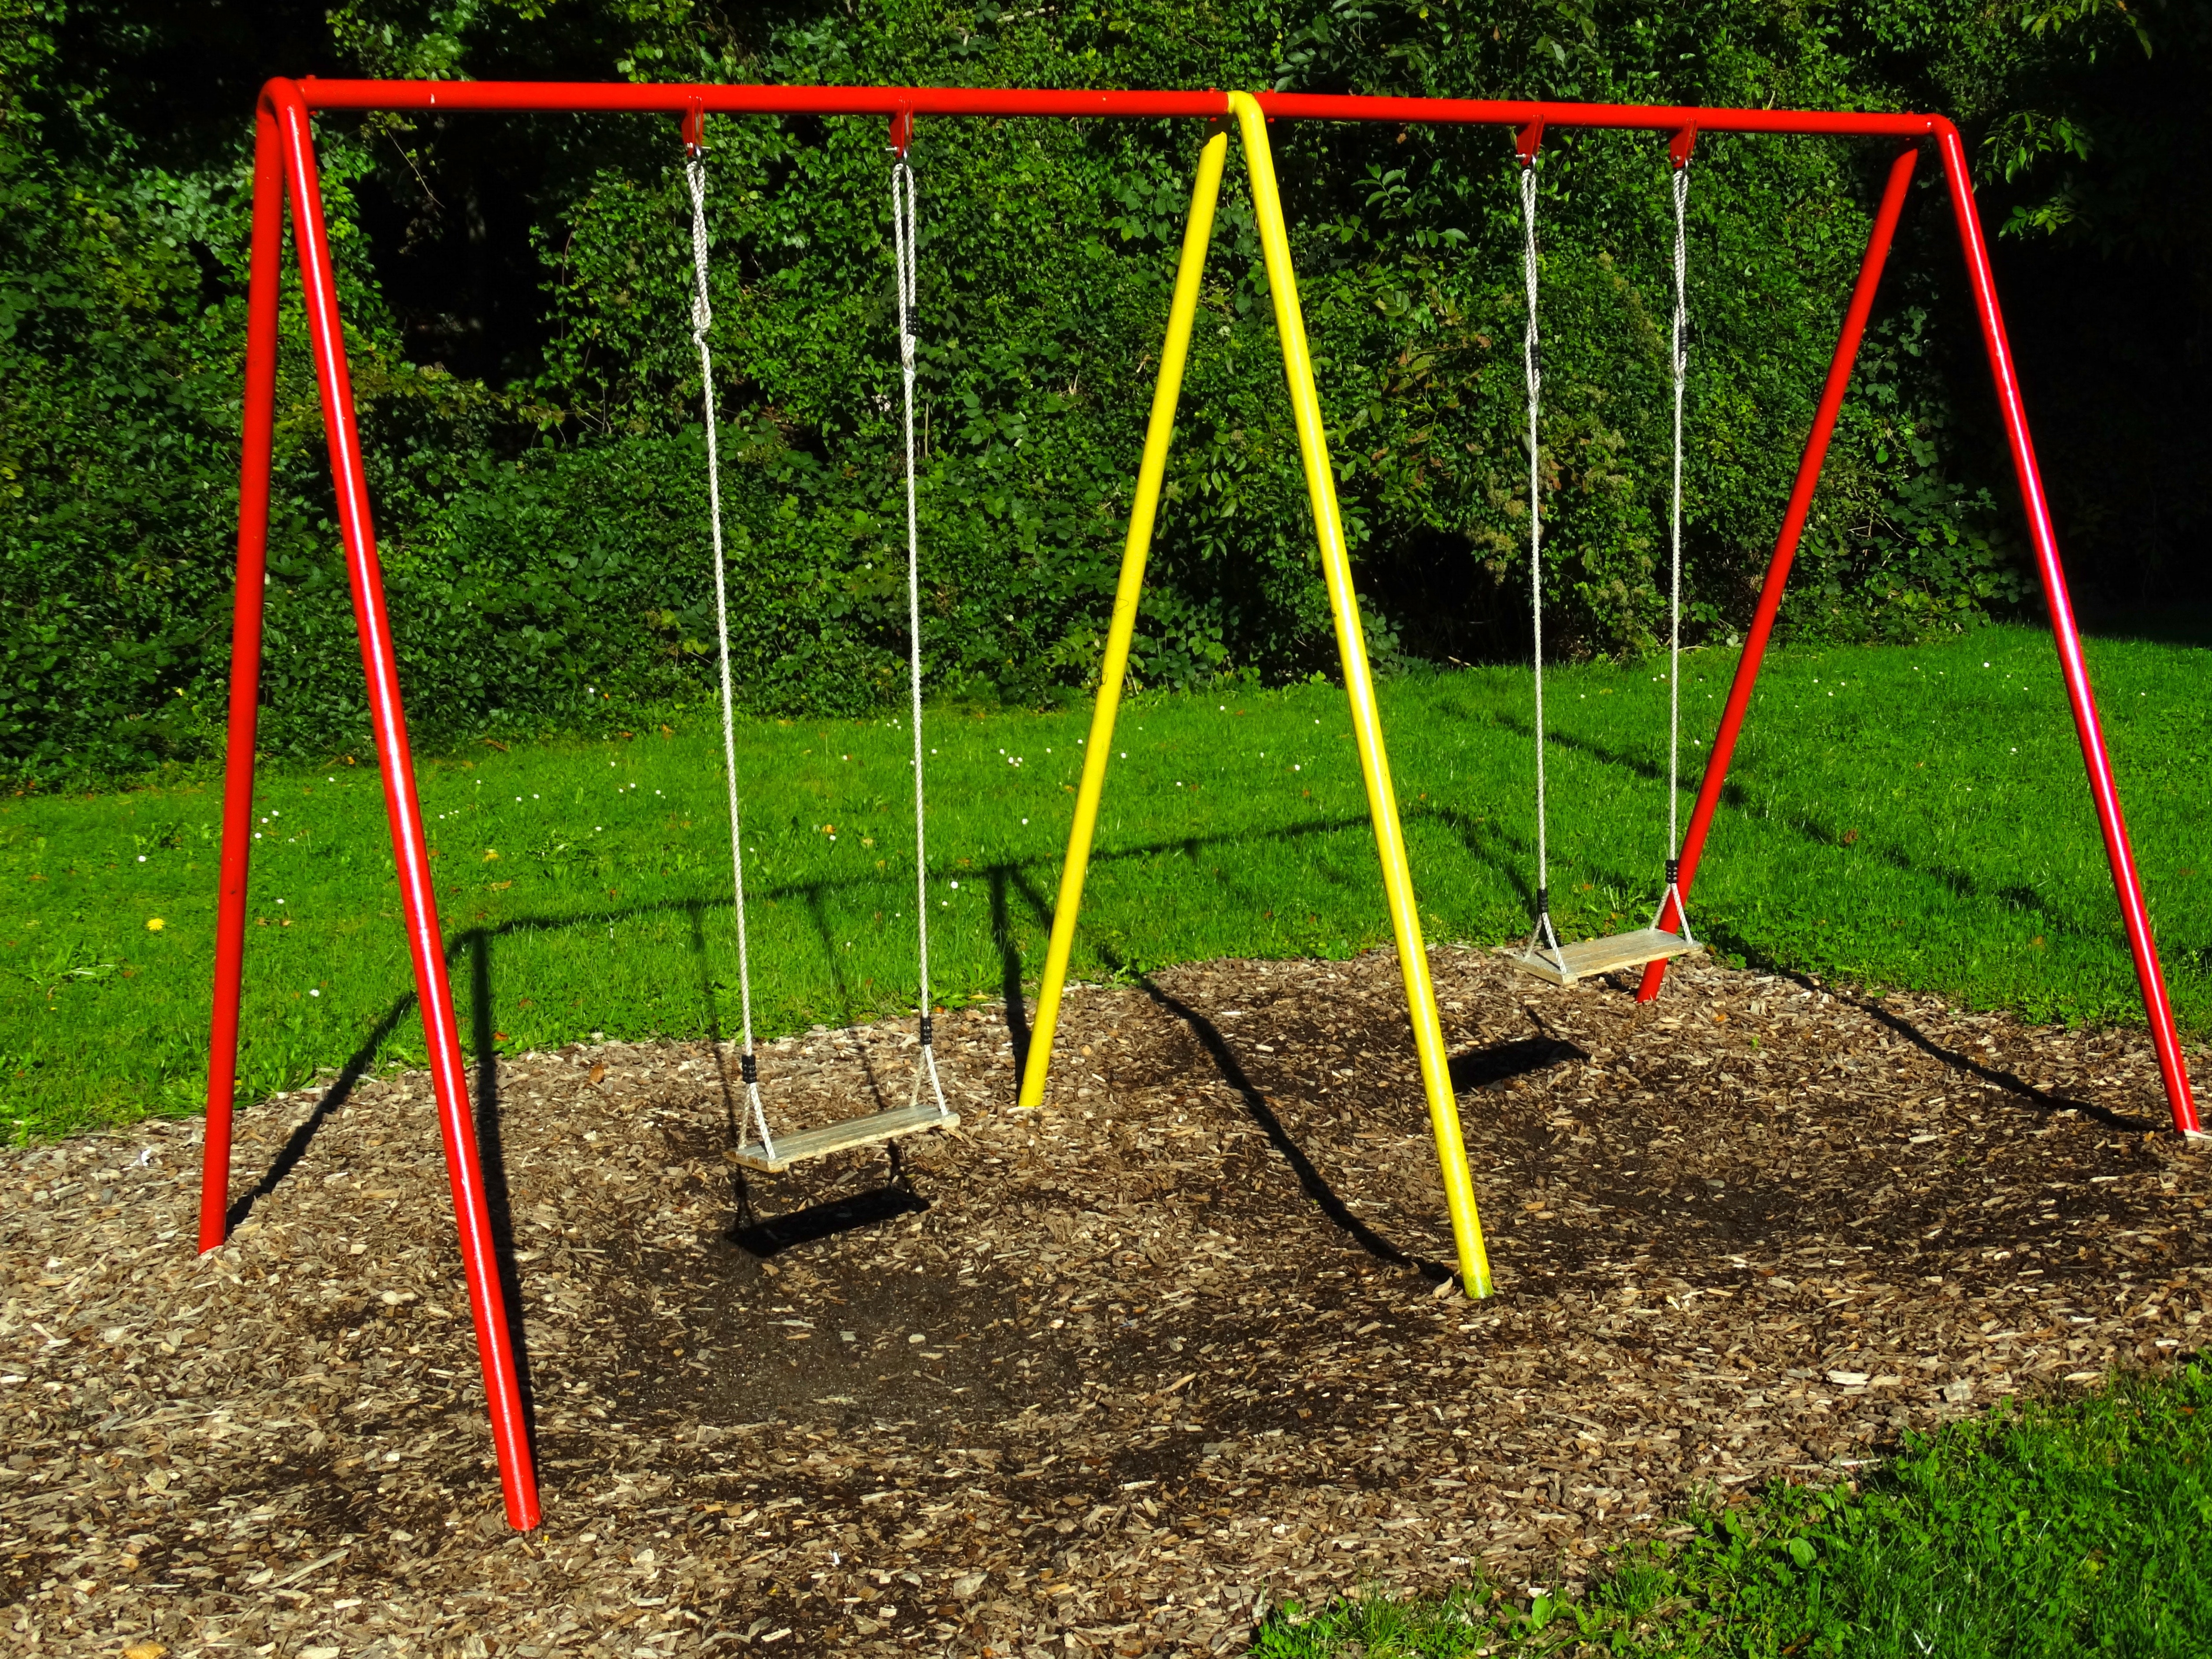 "yellow and red swing playground" image online crop.